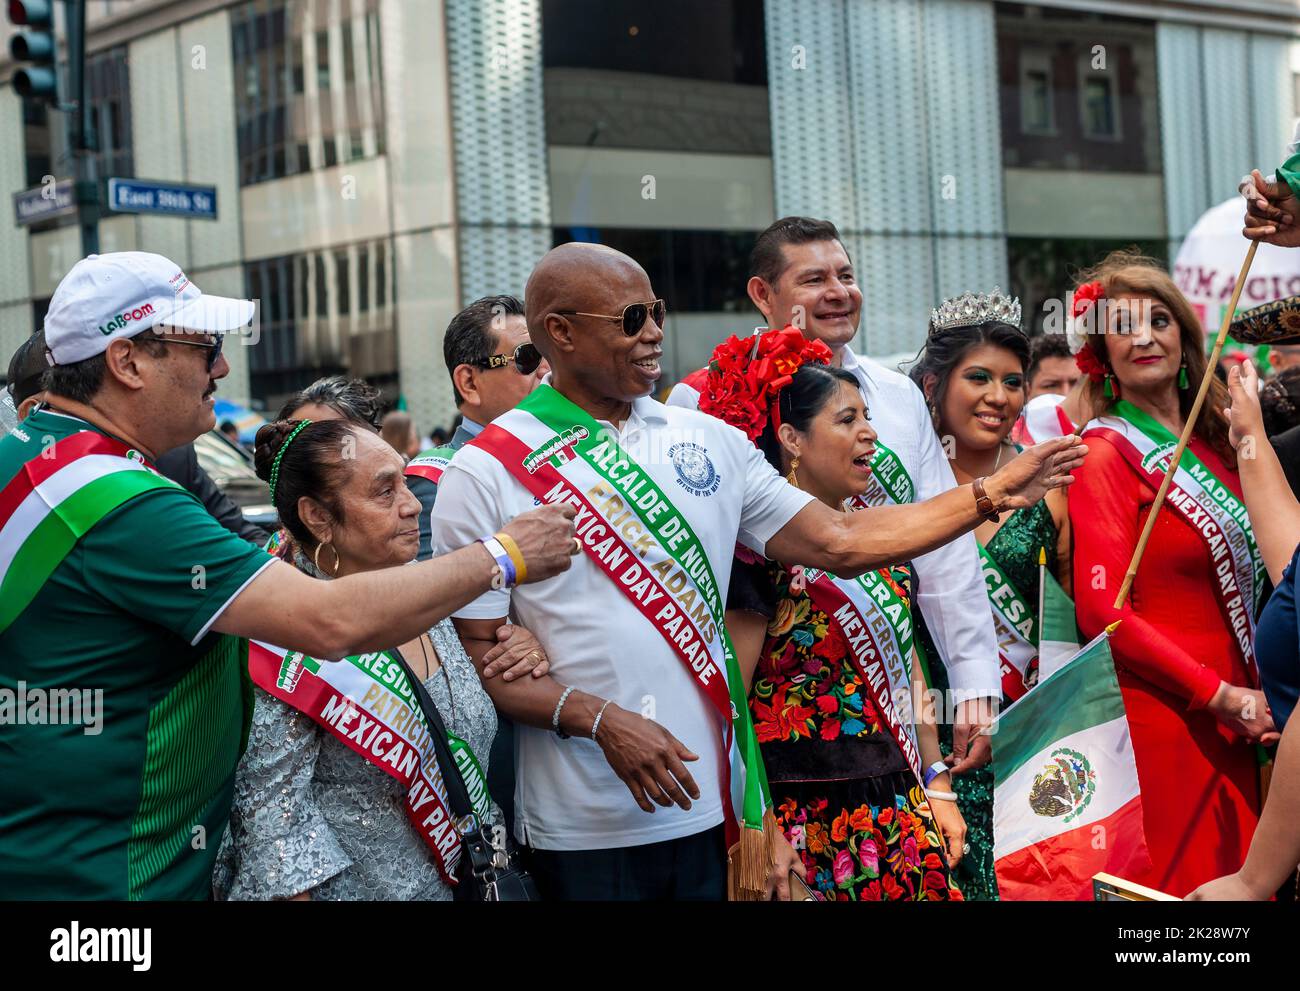 New York City Mayor Eric Adams, center, marches on Madison Avenue in New York on Sunday, September 18, 2022 in the annual Mexican Independence Day Parade. The parades that take place from the spring into the fall in New York celebrate the cultural diversity of the city. (© Richard B. Levine) Stock Photo